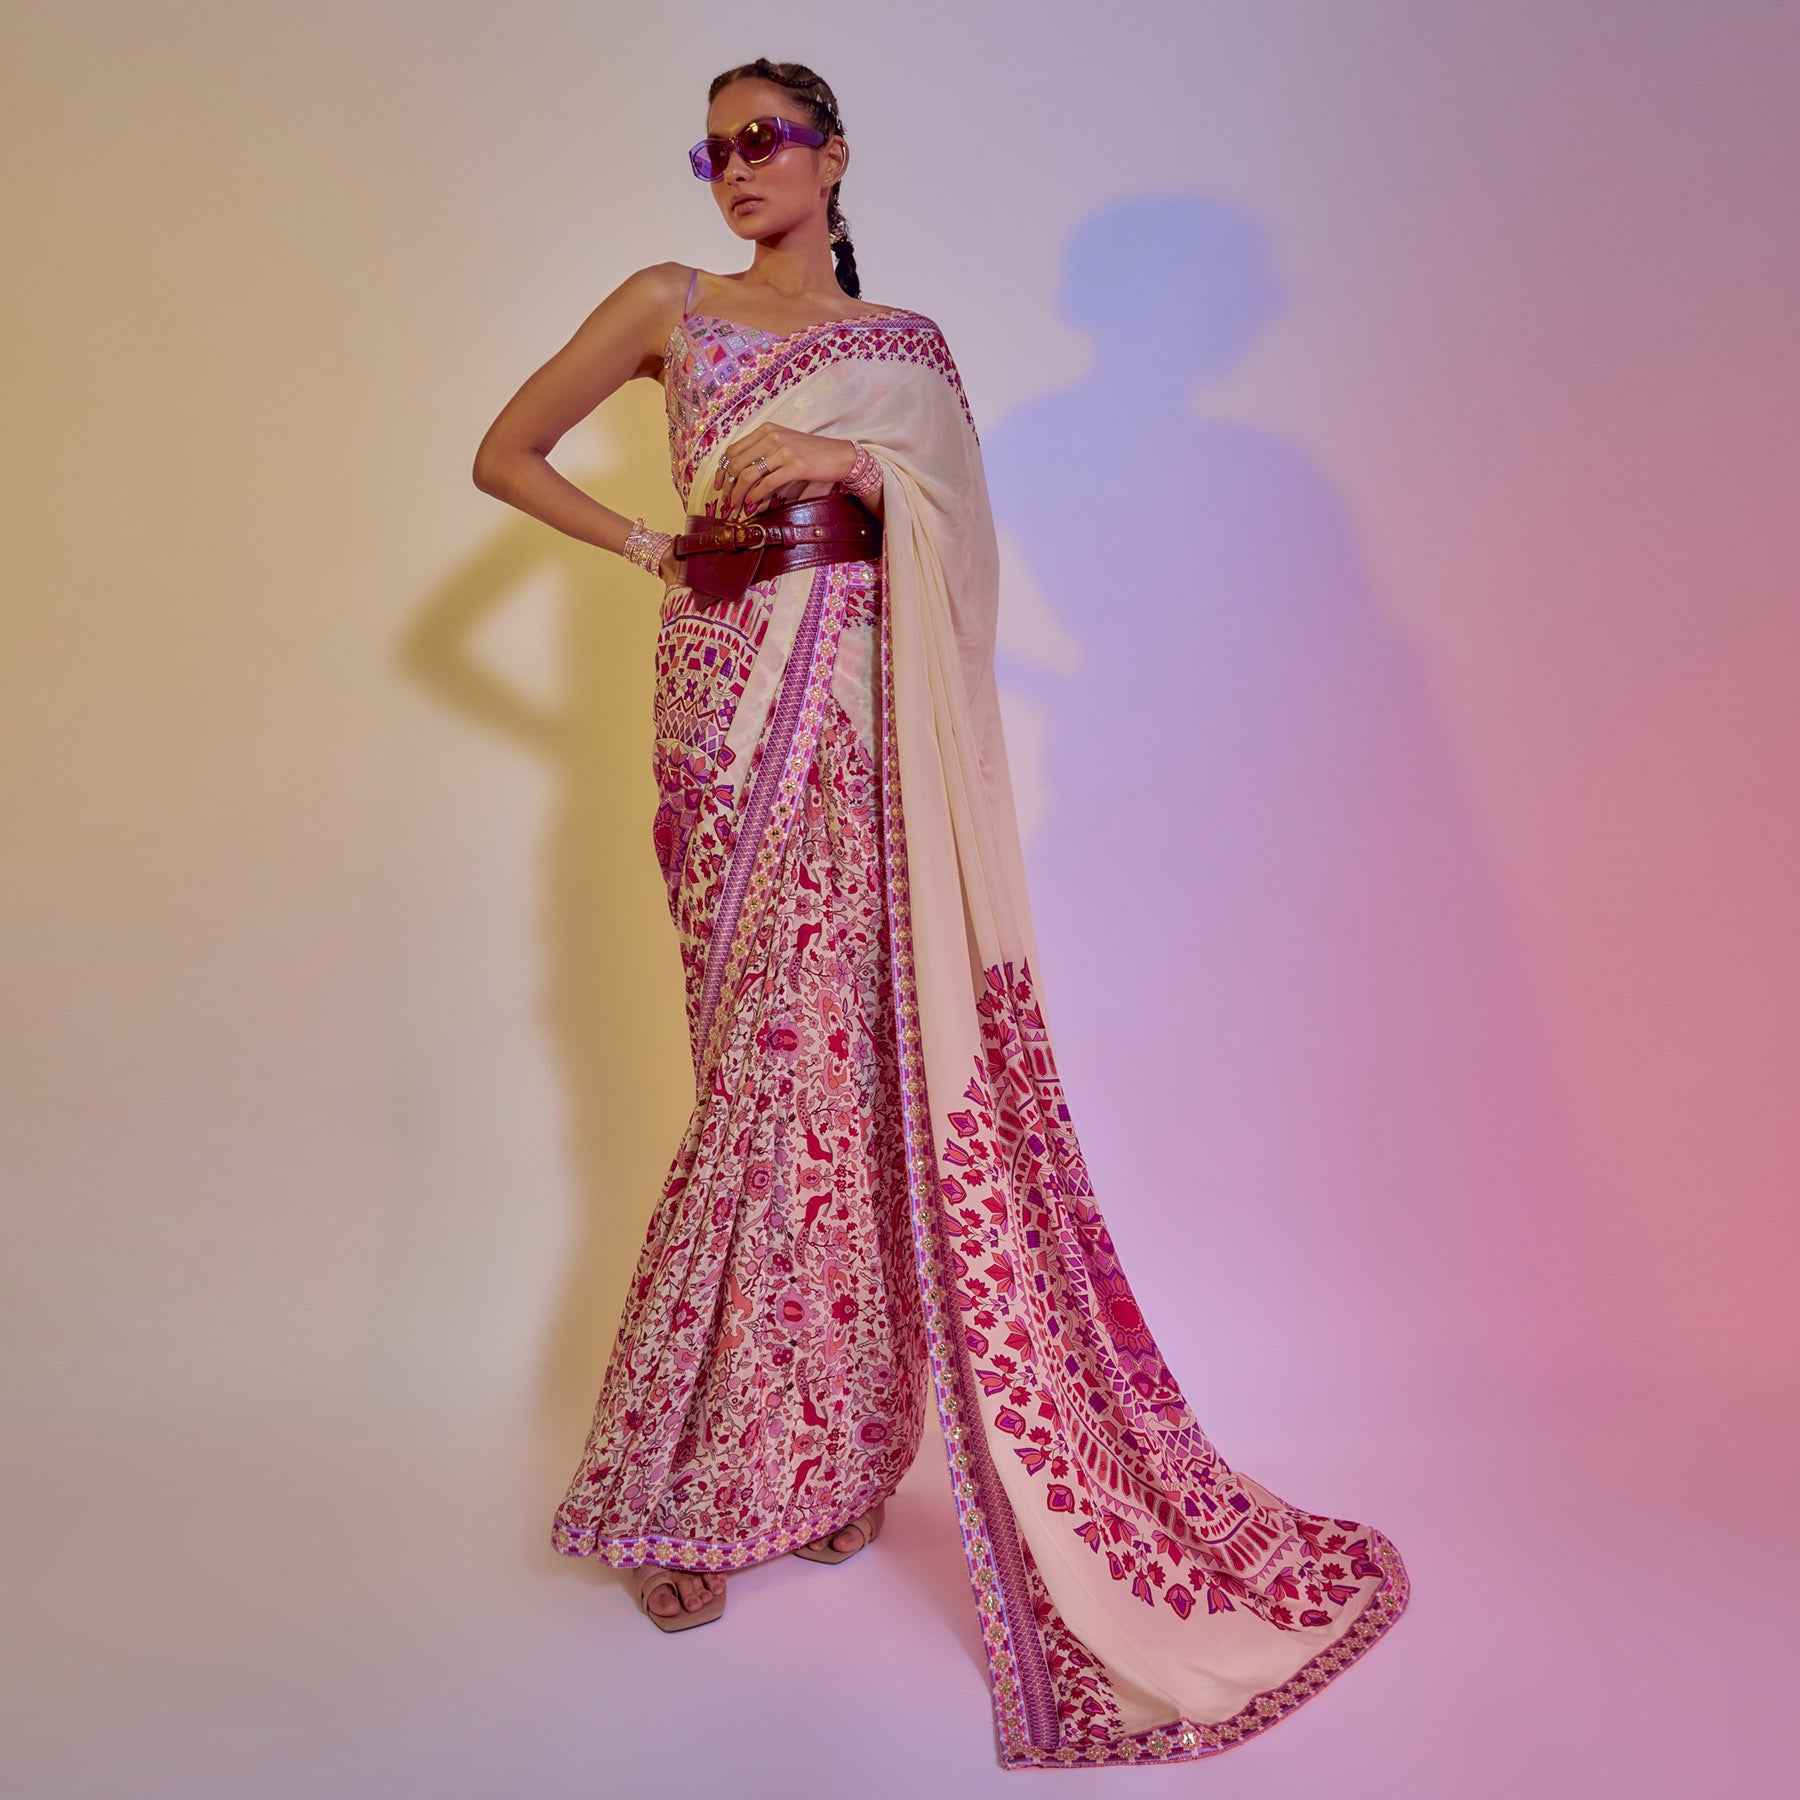 RAVI PRINT PALLU WITH IVORY SAANJH FLORAL PRINT SAREE TEAMED WITH A LILAC EMBELLISHED BUSTIER